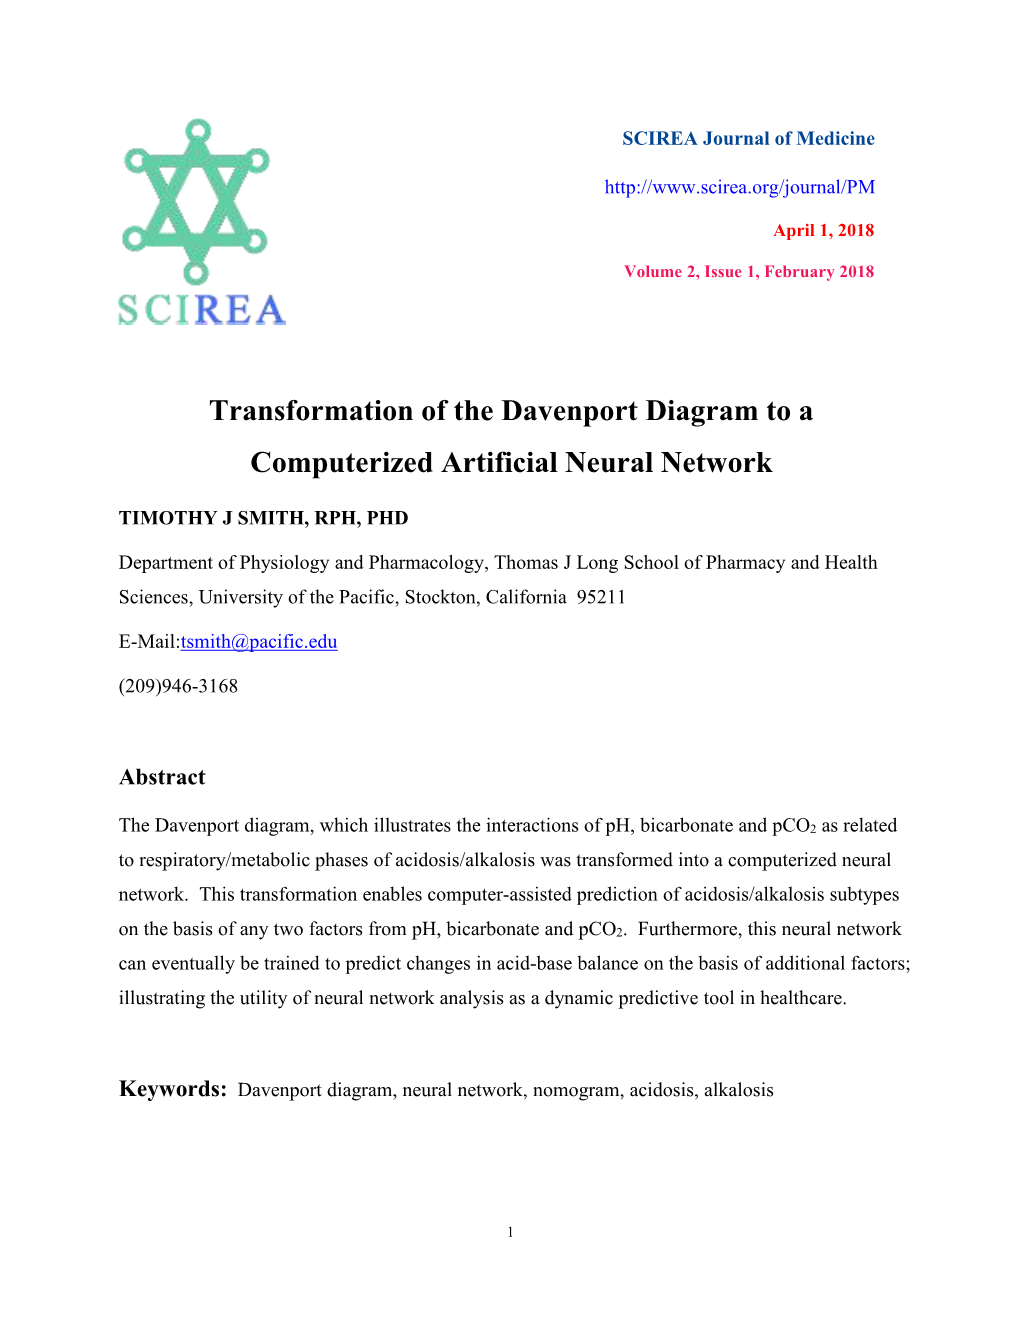 Transformation of the Davenport Diagram to a Computerized Artificial Neural Network